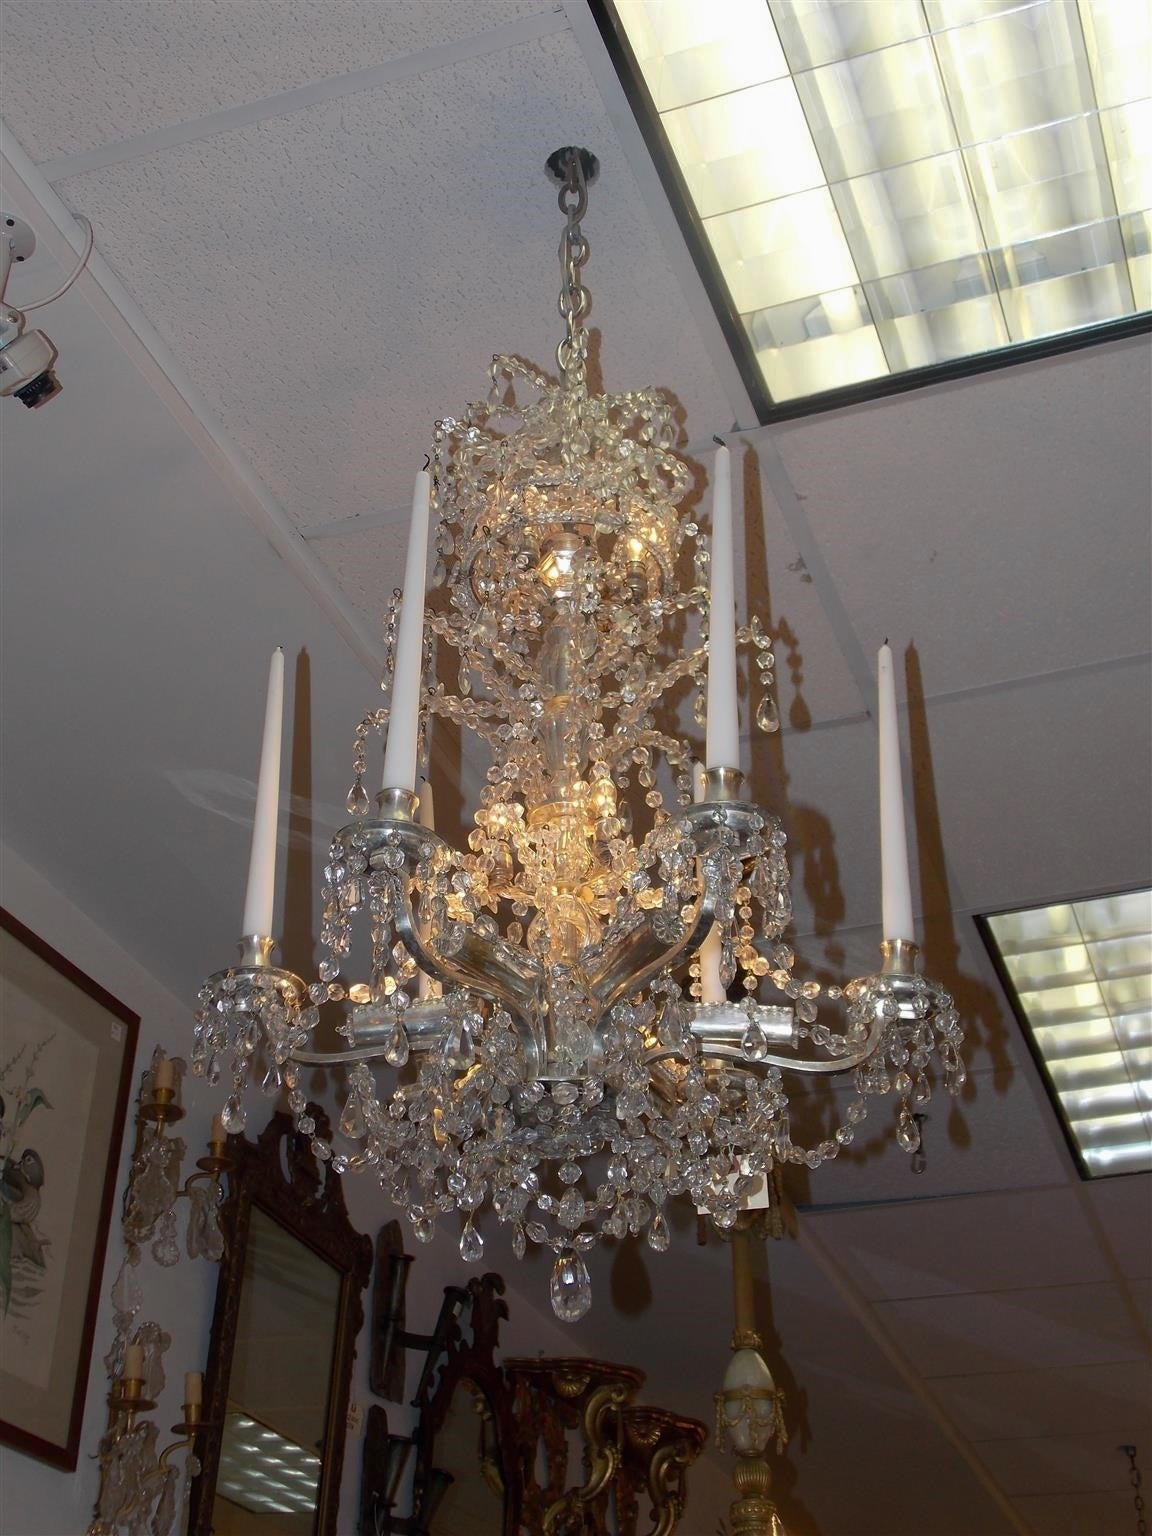 Cast French Silver Gilt Nickel and Bronze Six Arm Crystal Chandelier, Circa 1780 For Sale